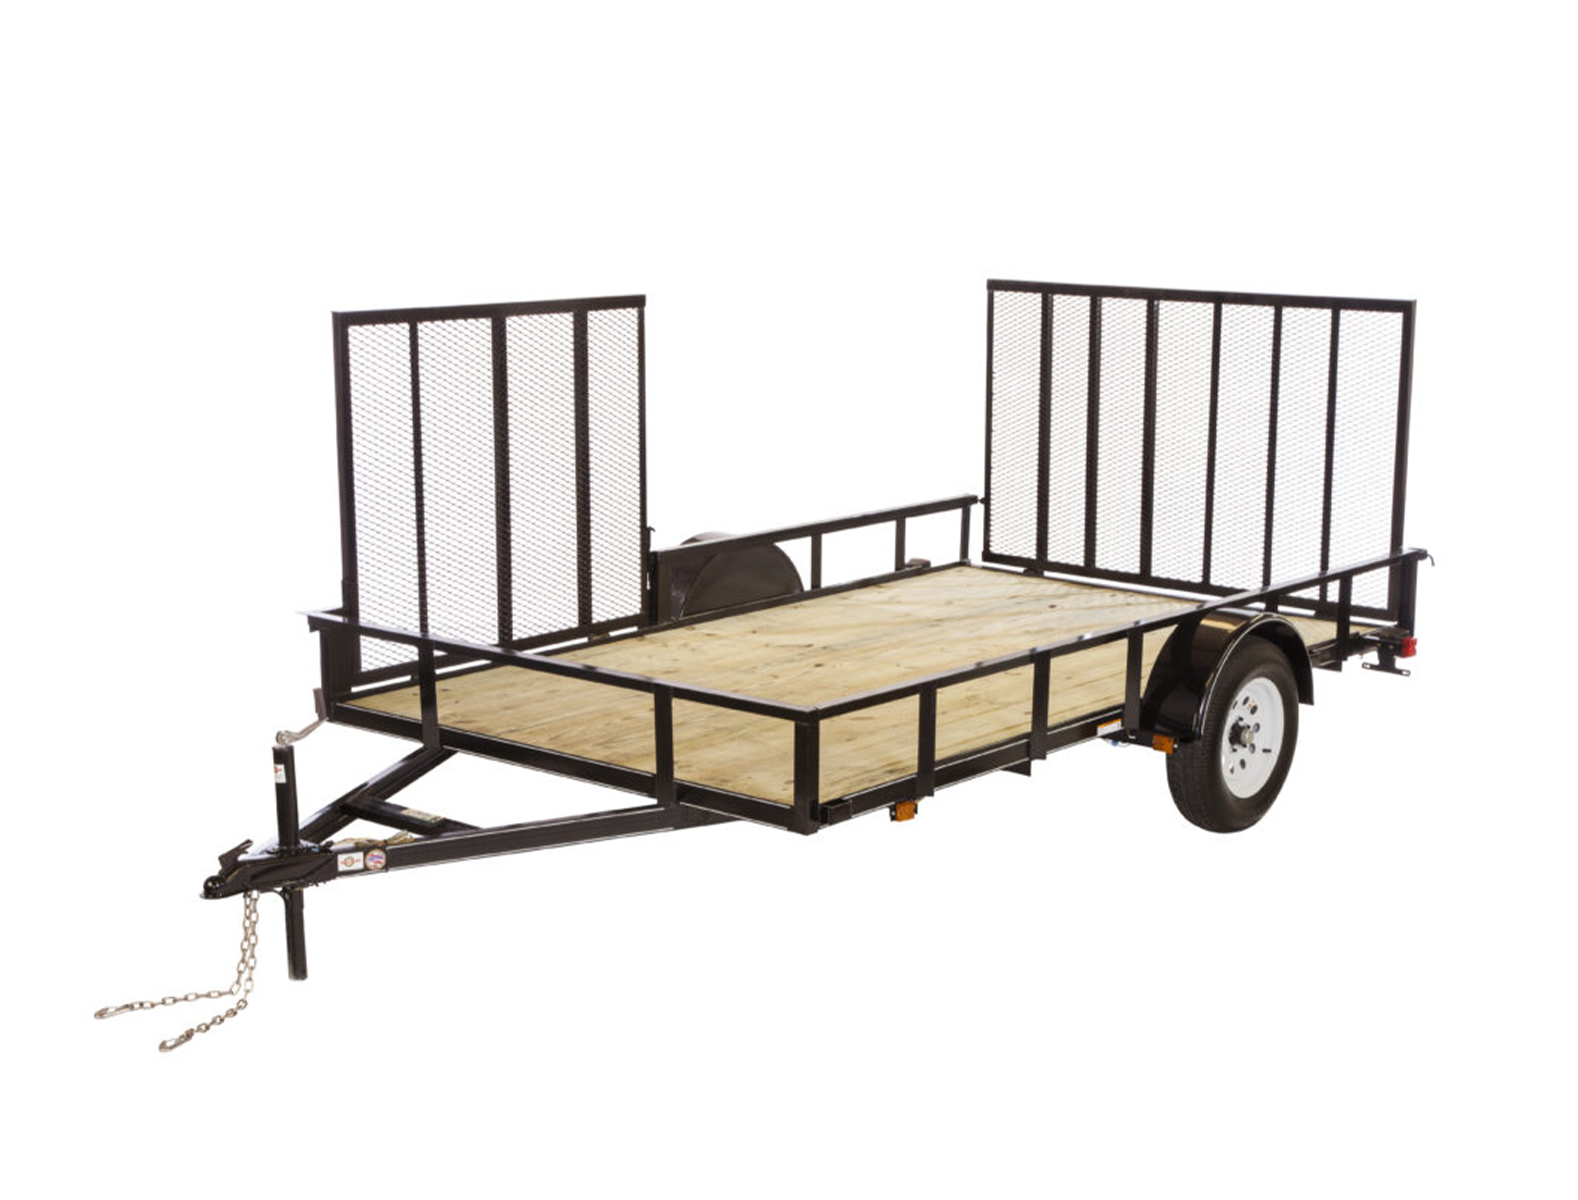 6x12 3K ATV Side Load Utility Trailer with wood floor and two gates